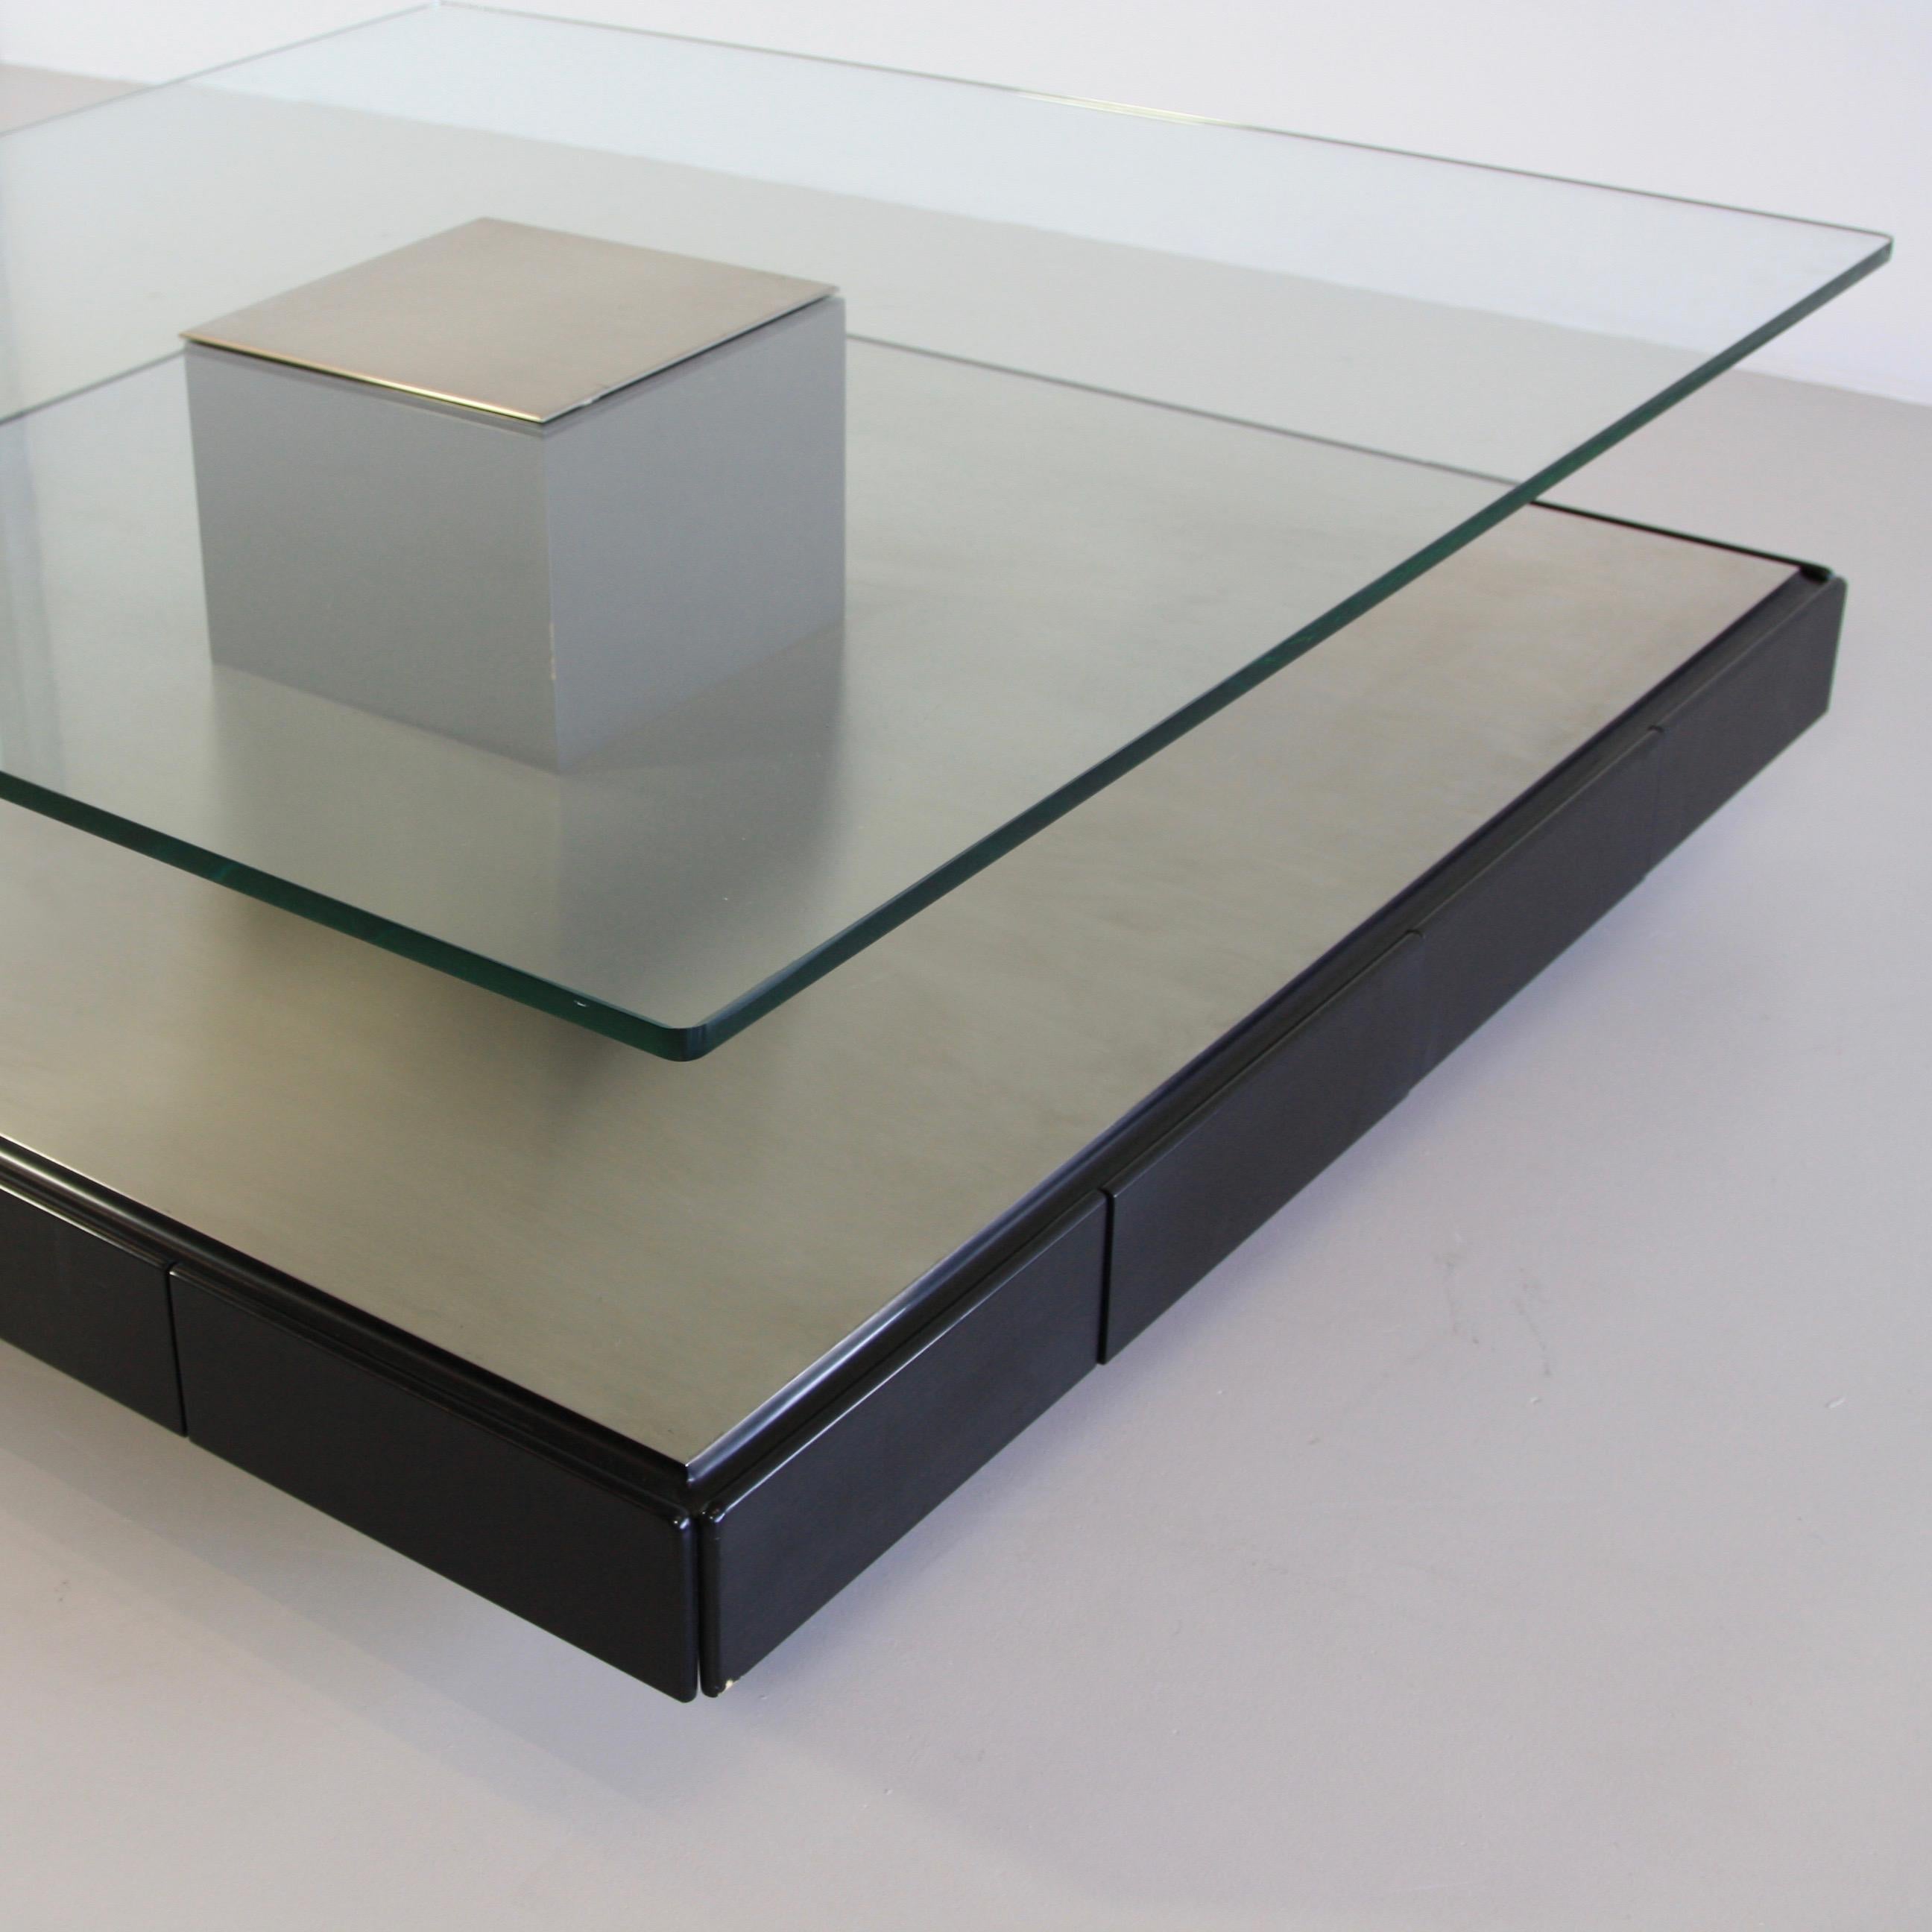 Large coffee table designed by Marco Fantoni. Italy, Tecno, 1971.

Minimalist coffee table (Tecno T147) with brushed metal base on wood containing eight drawers, thick glass shelf with brushed metal insert. Tecno labels on glass and all drawers.